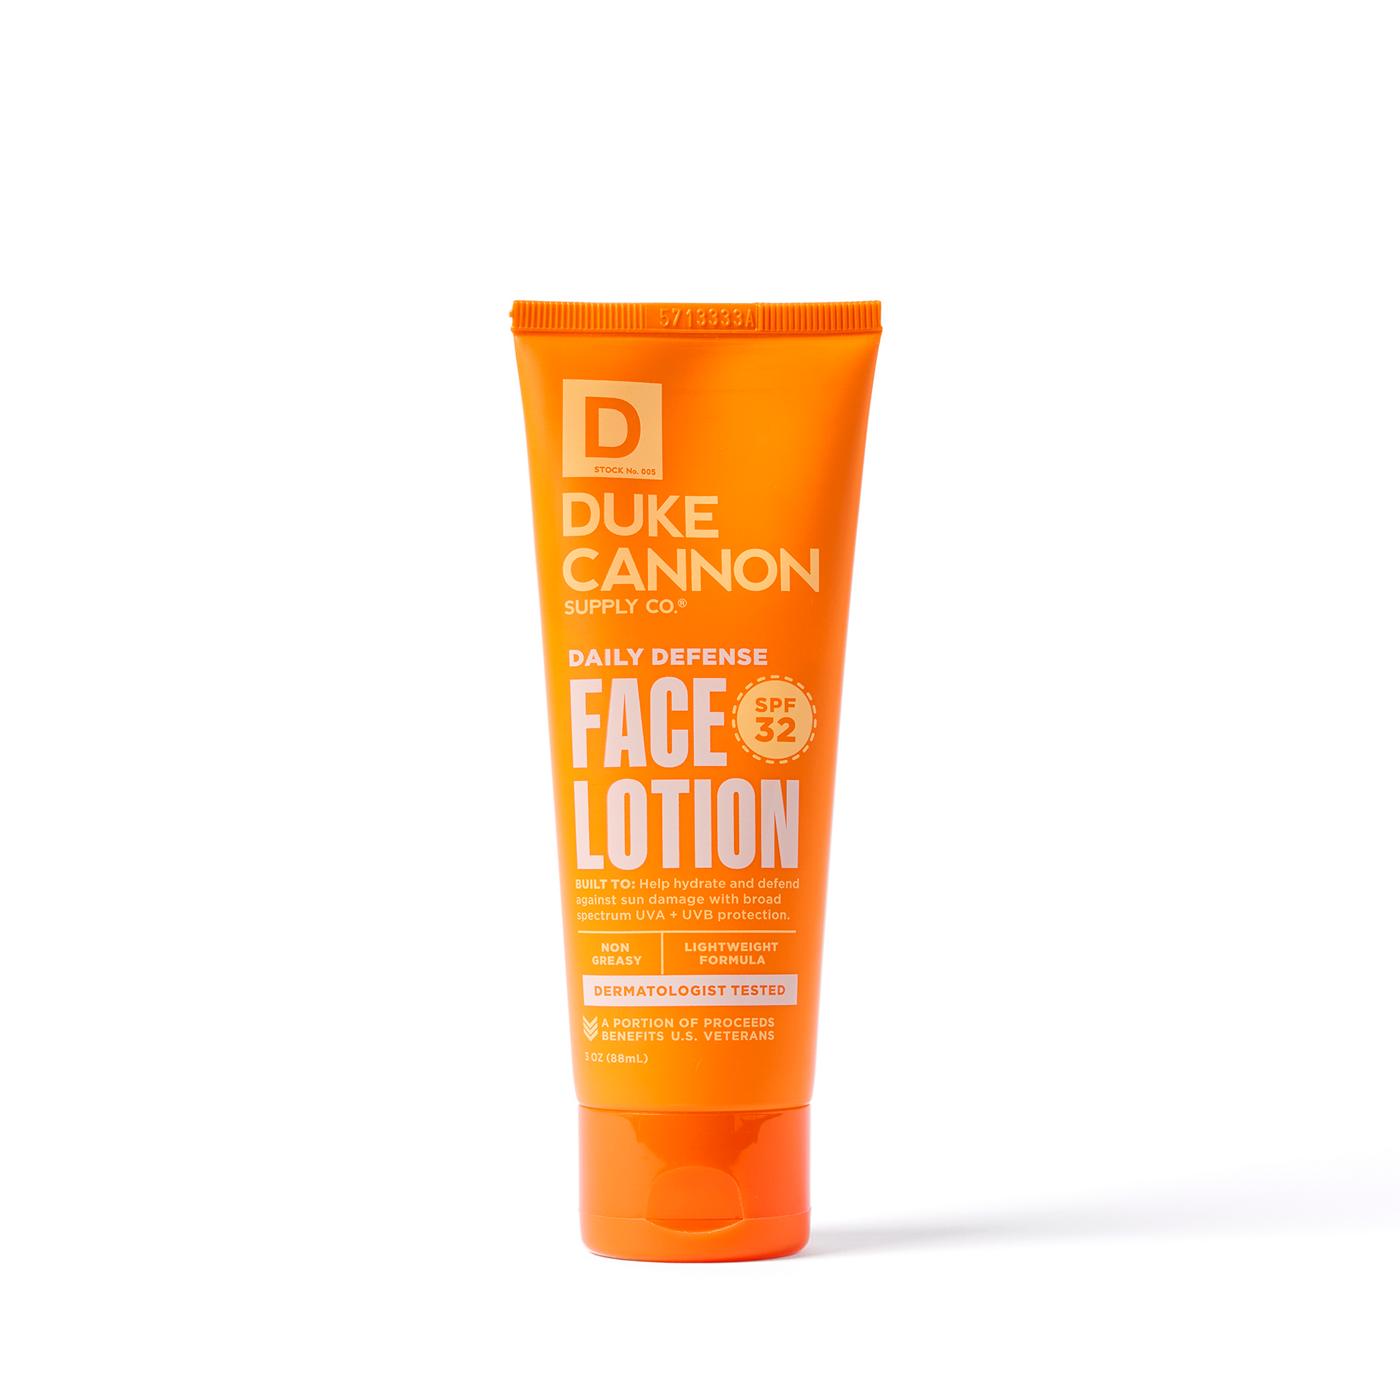 Duke Cannon Daily Defense Face Lotion; image 6 of 7